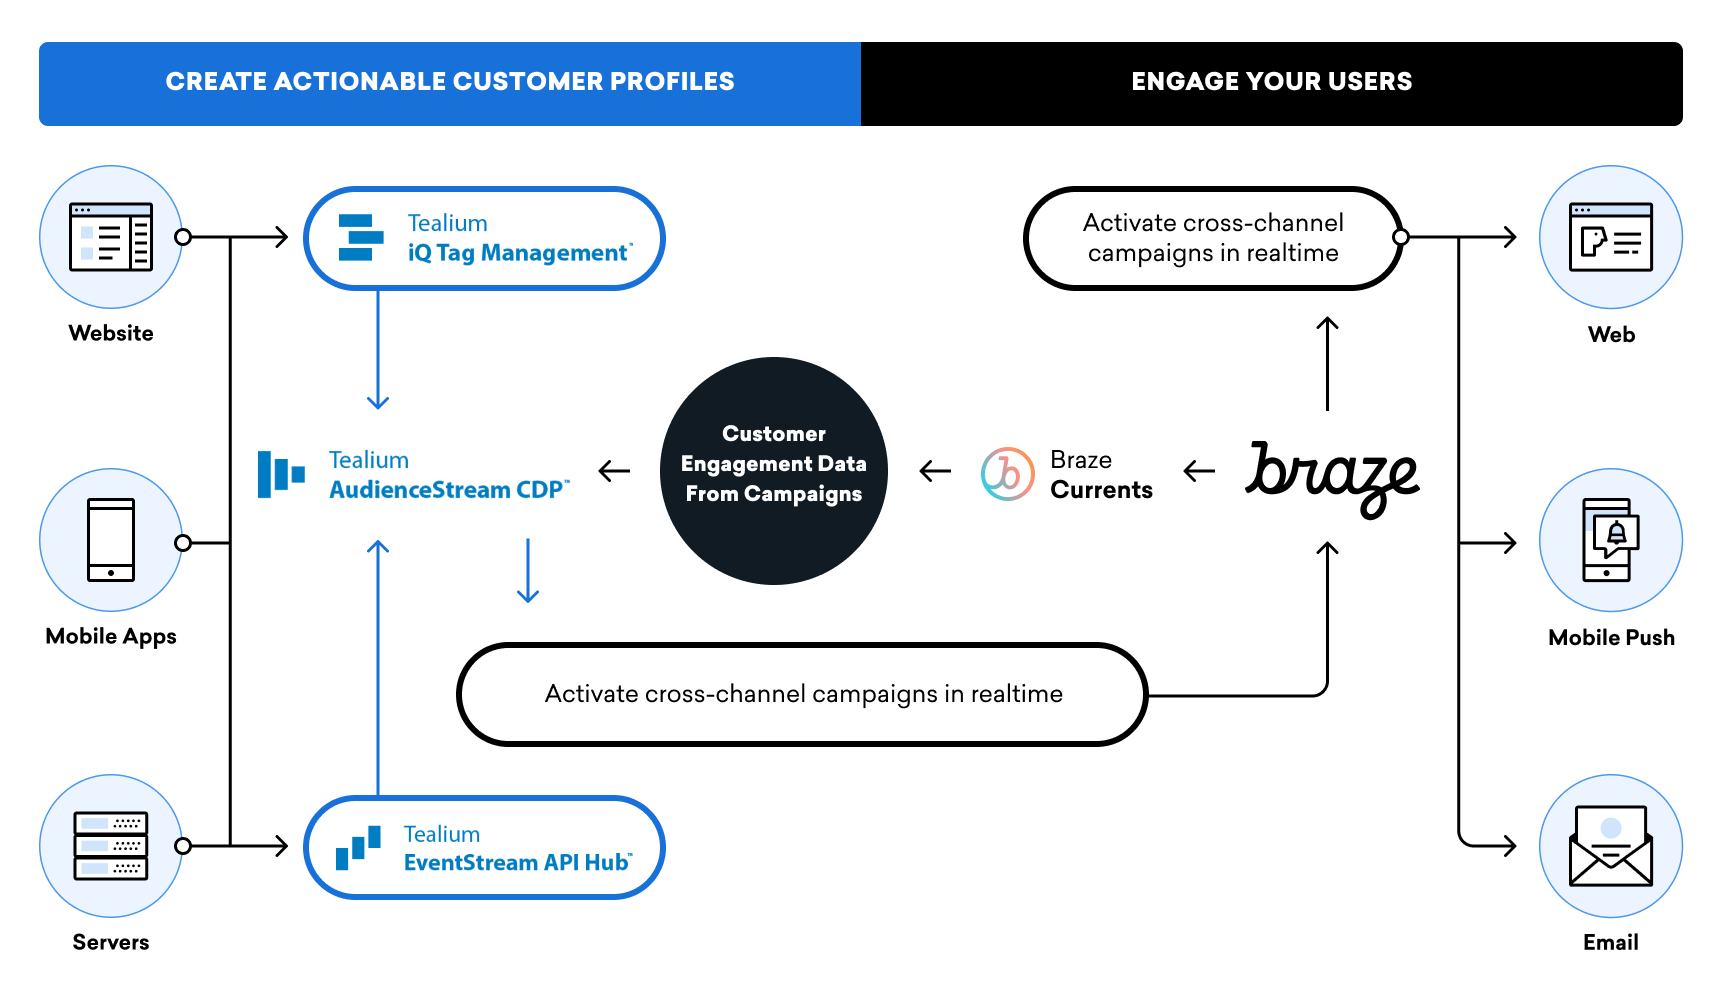 A Tealium overview graphic showing how the different Tealium products and the Braze platform fit together to activate cross-channel campaigns in real-time.